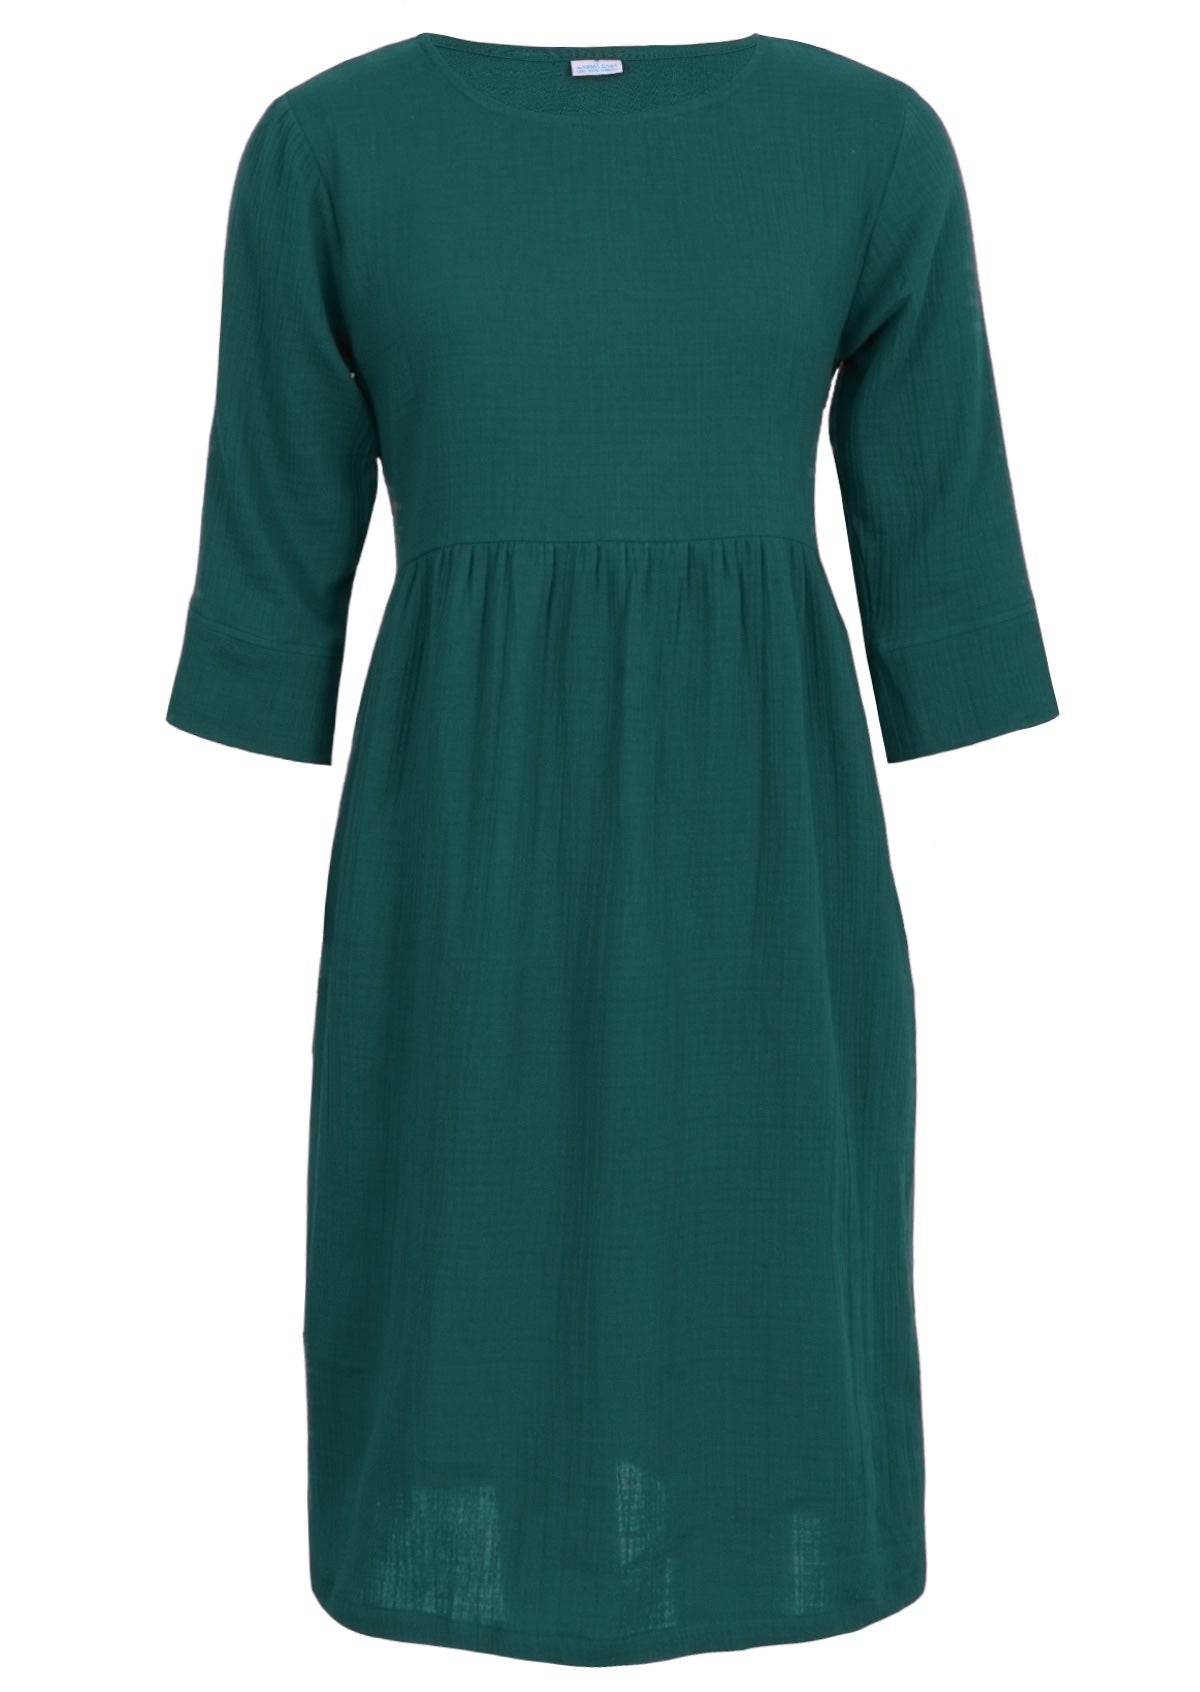 Double cotton dress with round neckline and 3/4 sleeves